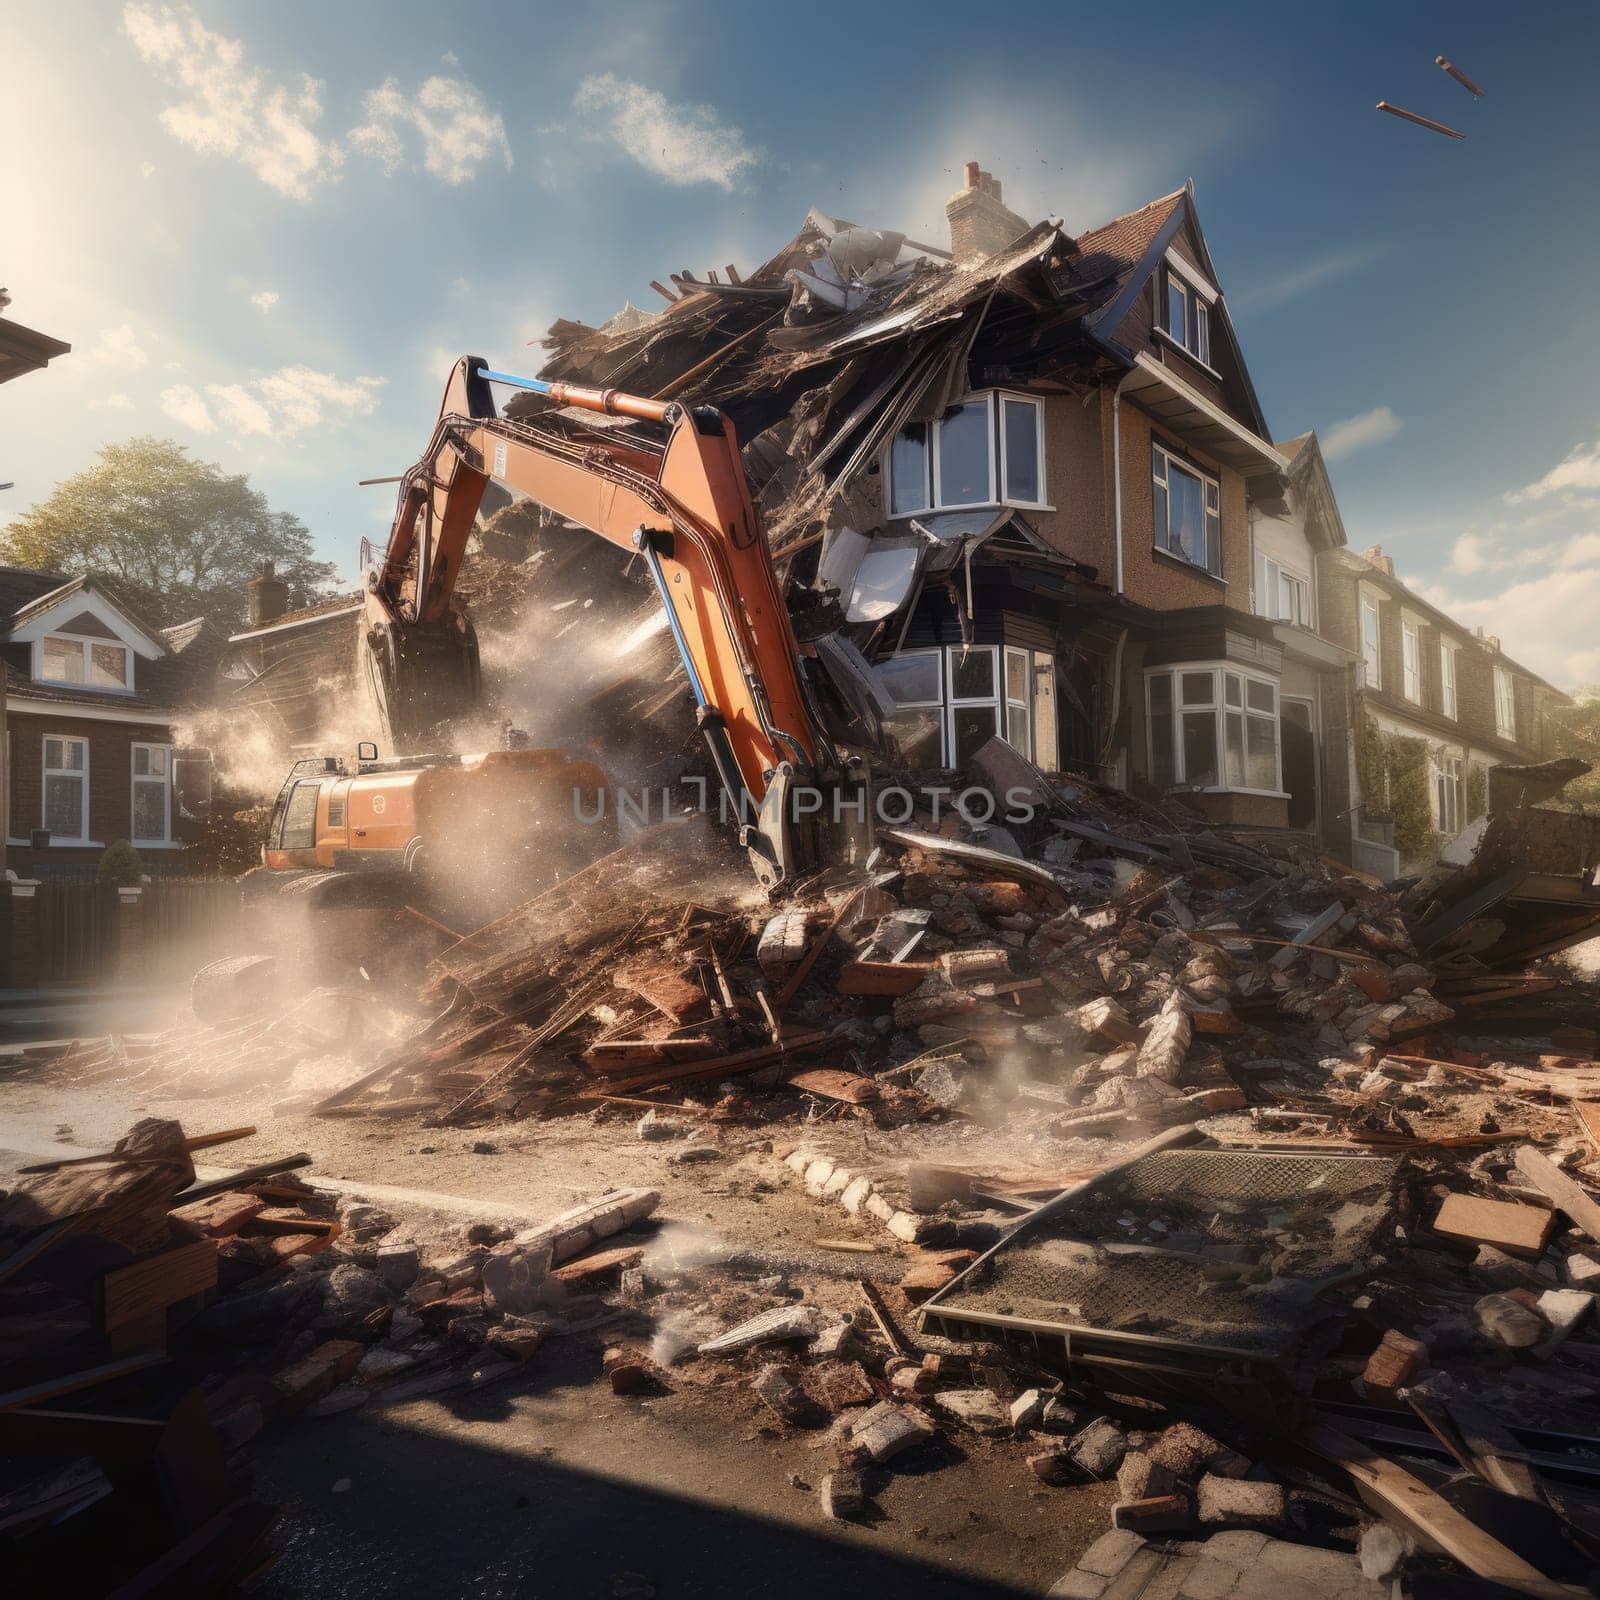 A demolished house stands in ruins while a bulldozer looms in the foreground, showing the aftermath of a house demolition.